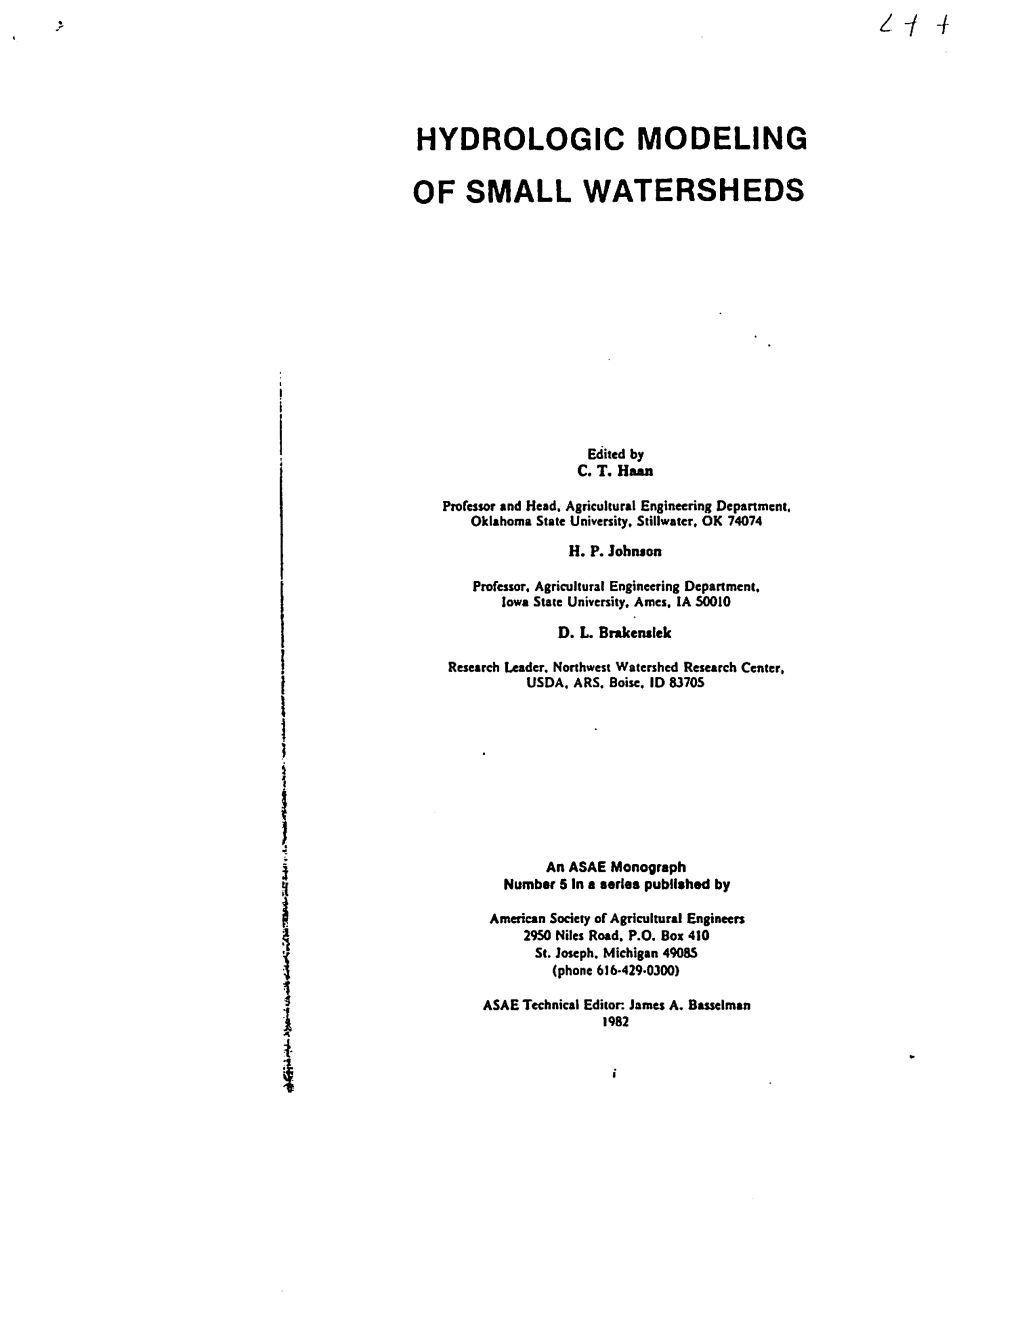 Hydrologic Modeling of Small Watersheds